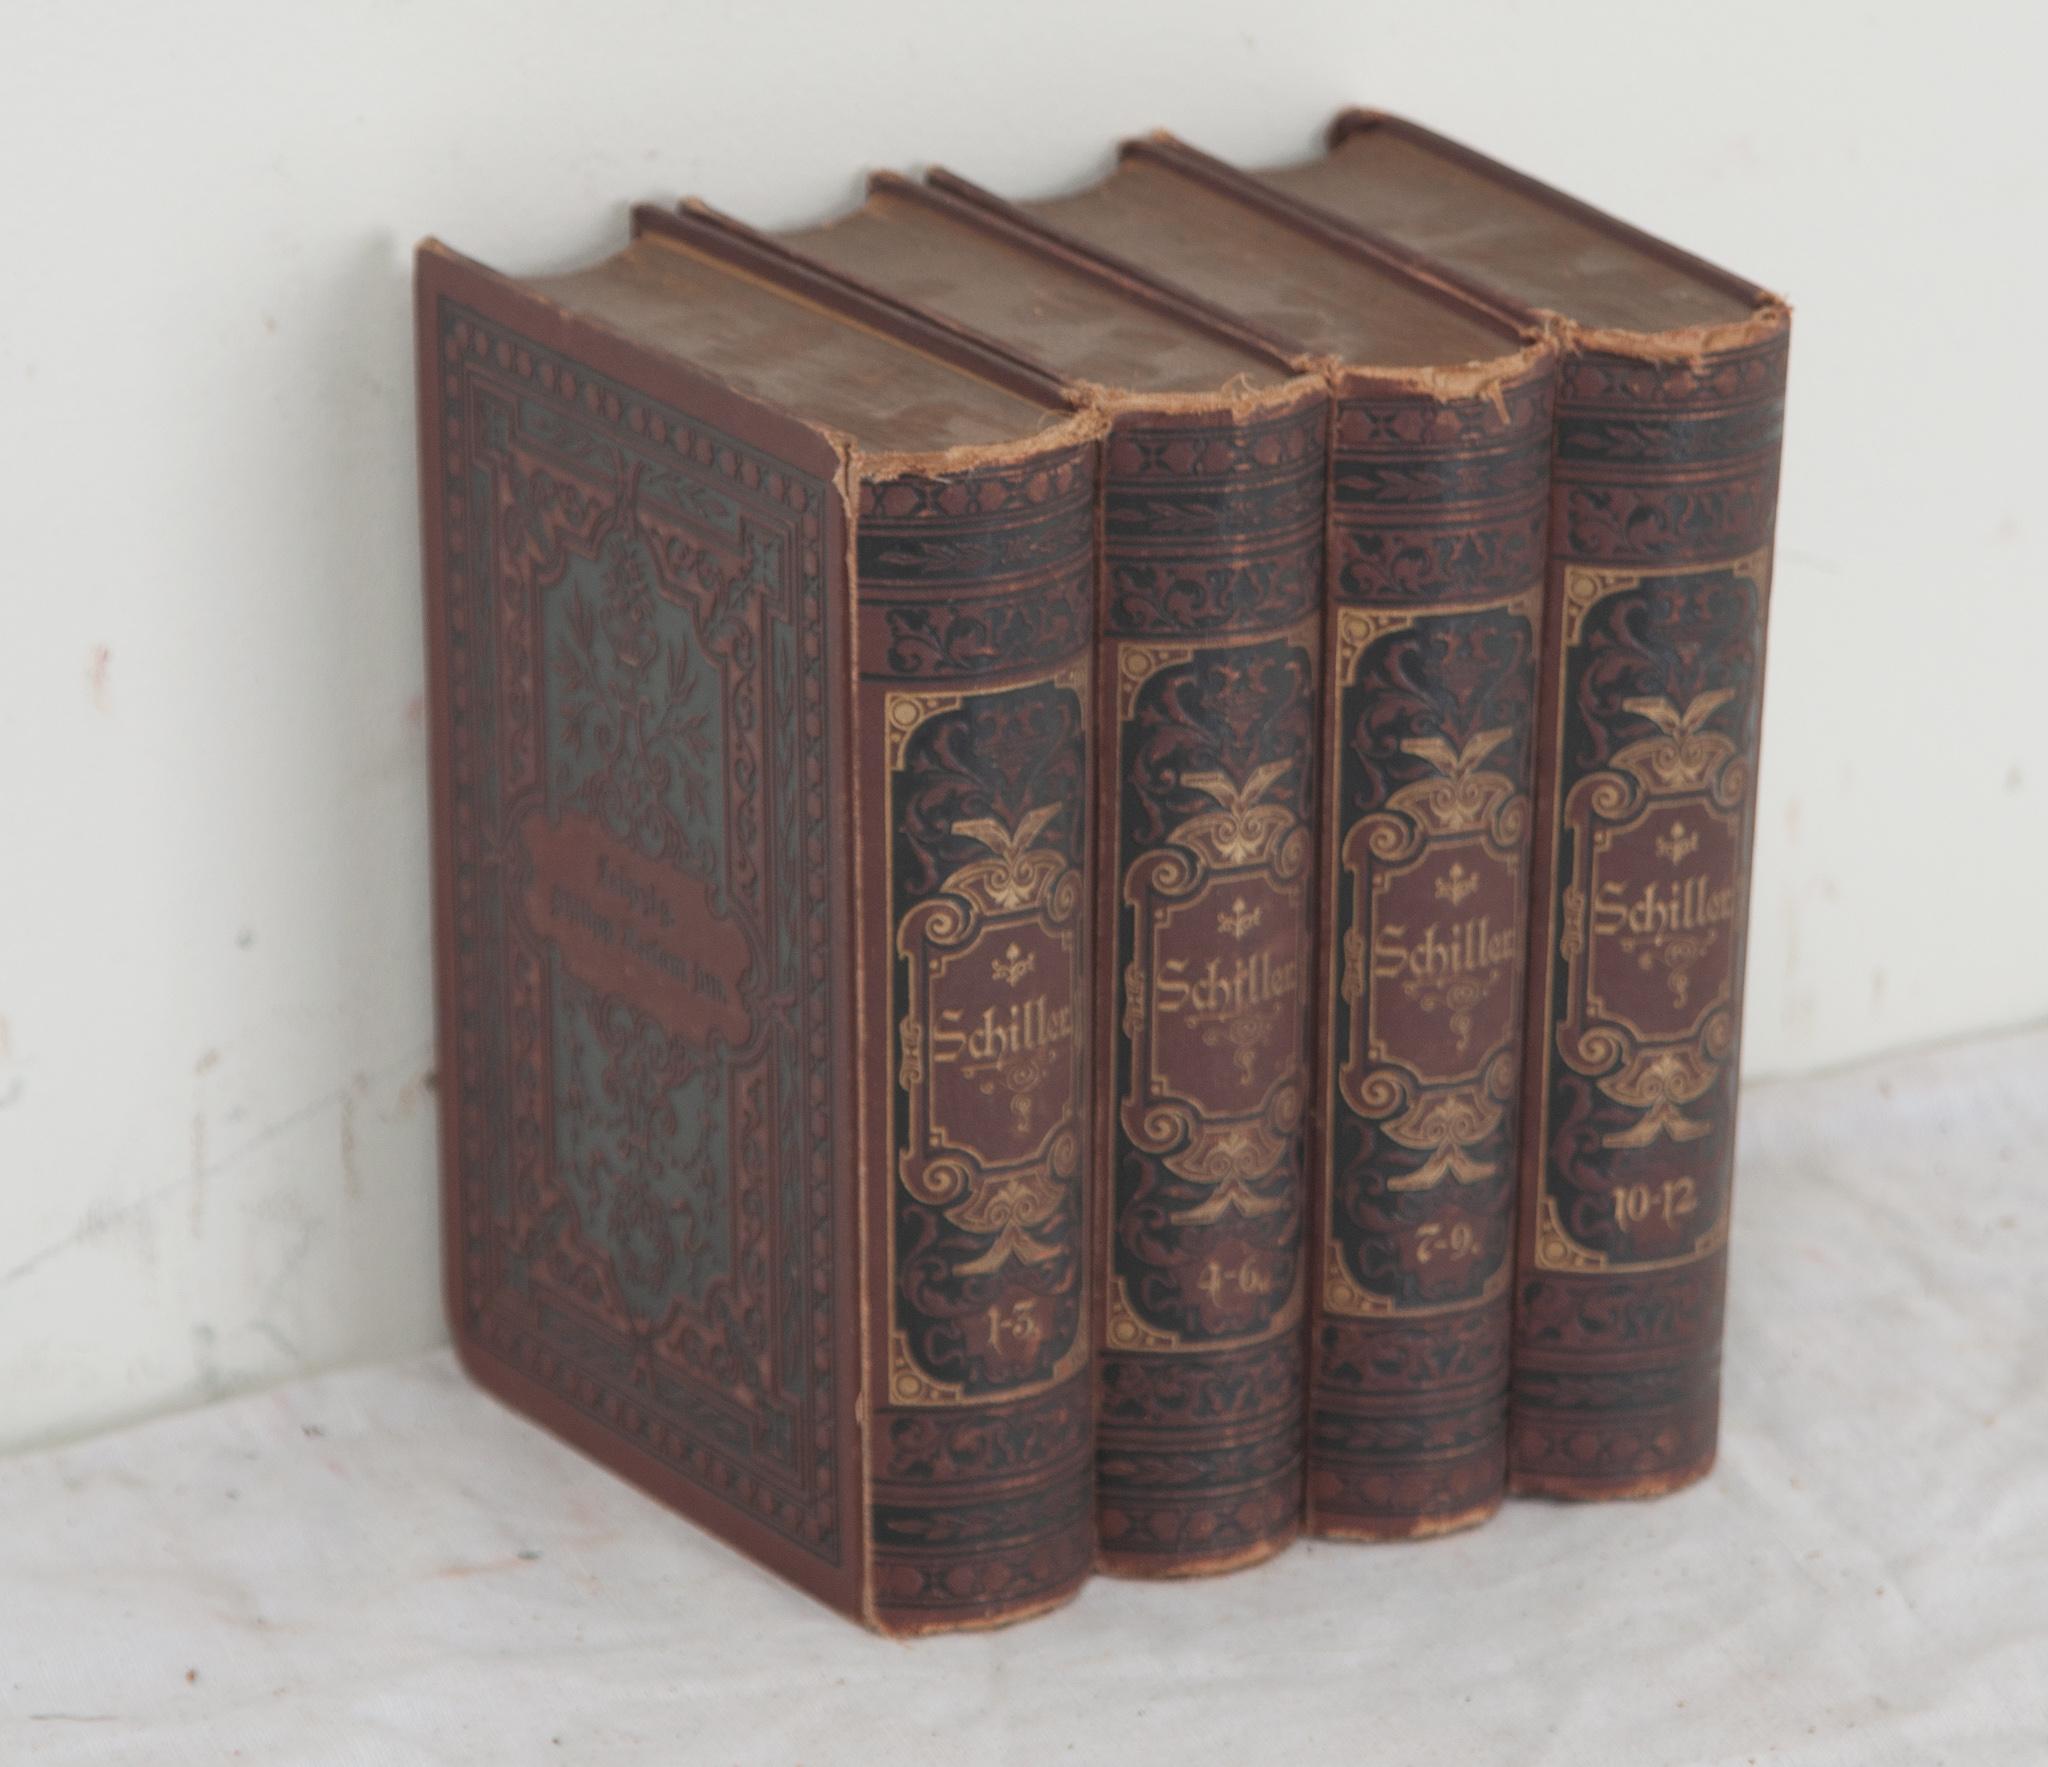 A collection of four volumes of poetry by German playwright and poet Friedrich Schiller. Leather bound with gold lettering, this set includes works found by Schiller’s sons after his death and therefore are not included in his previous publications.